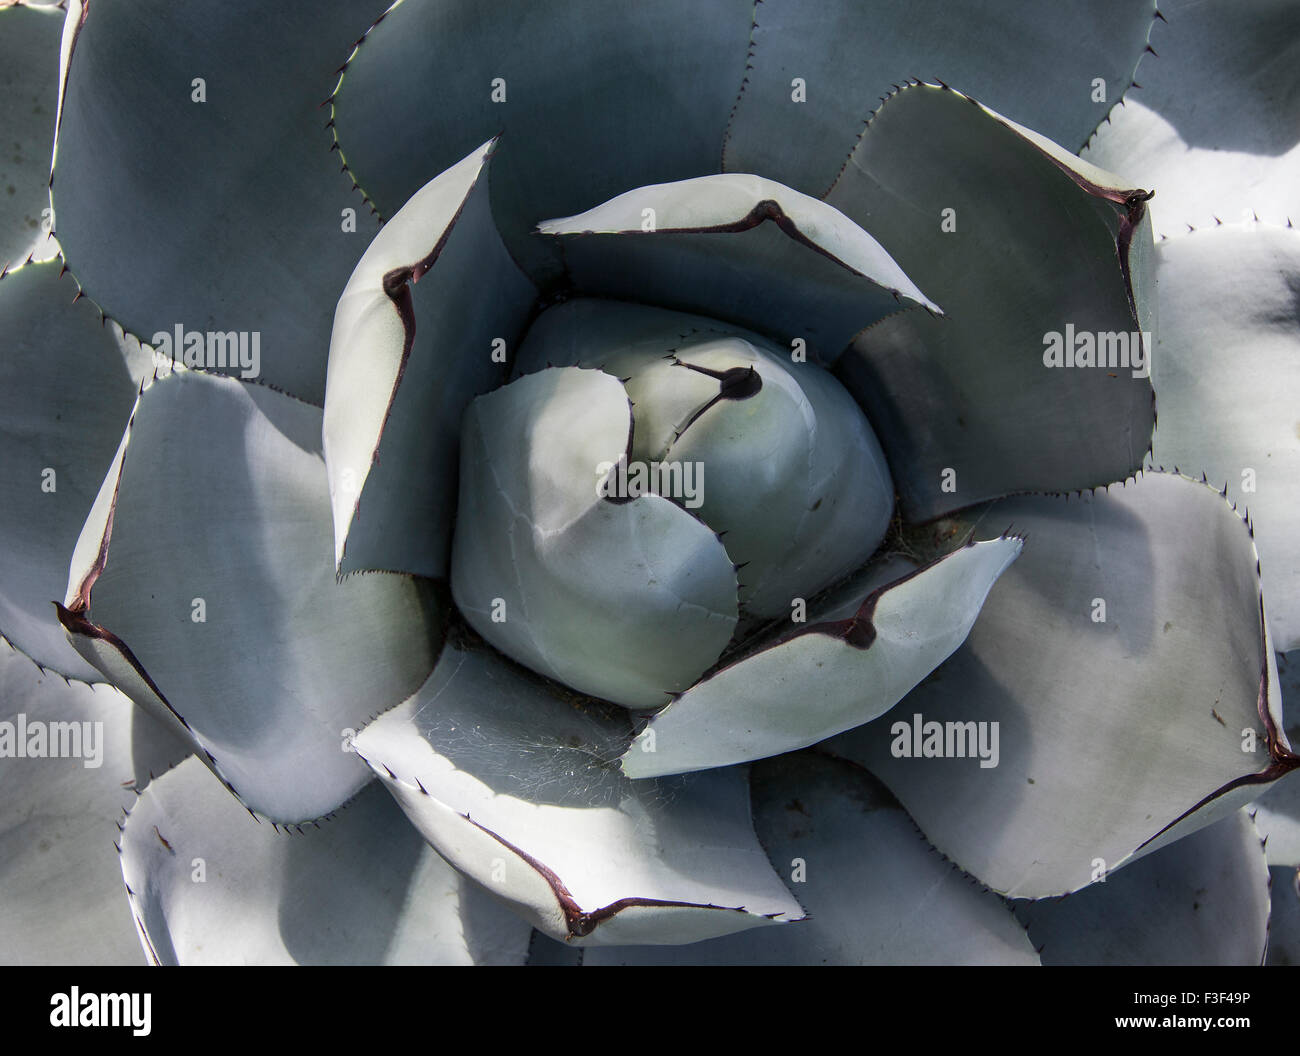 Ariel view of a succulent. Stock Photo